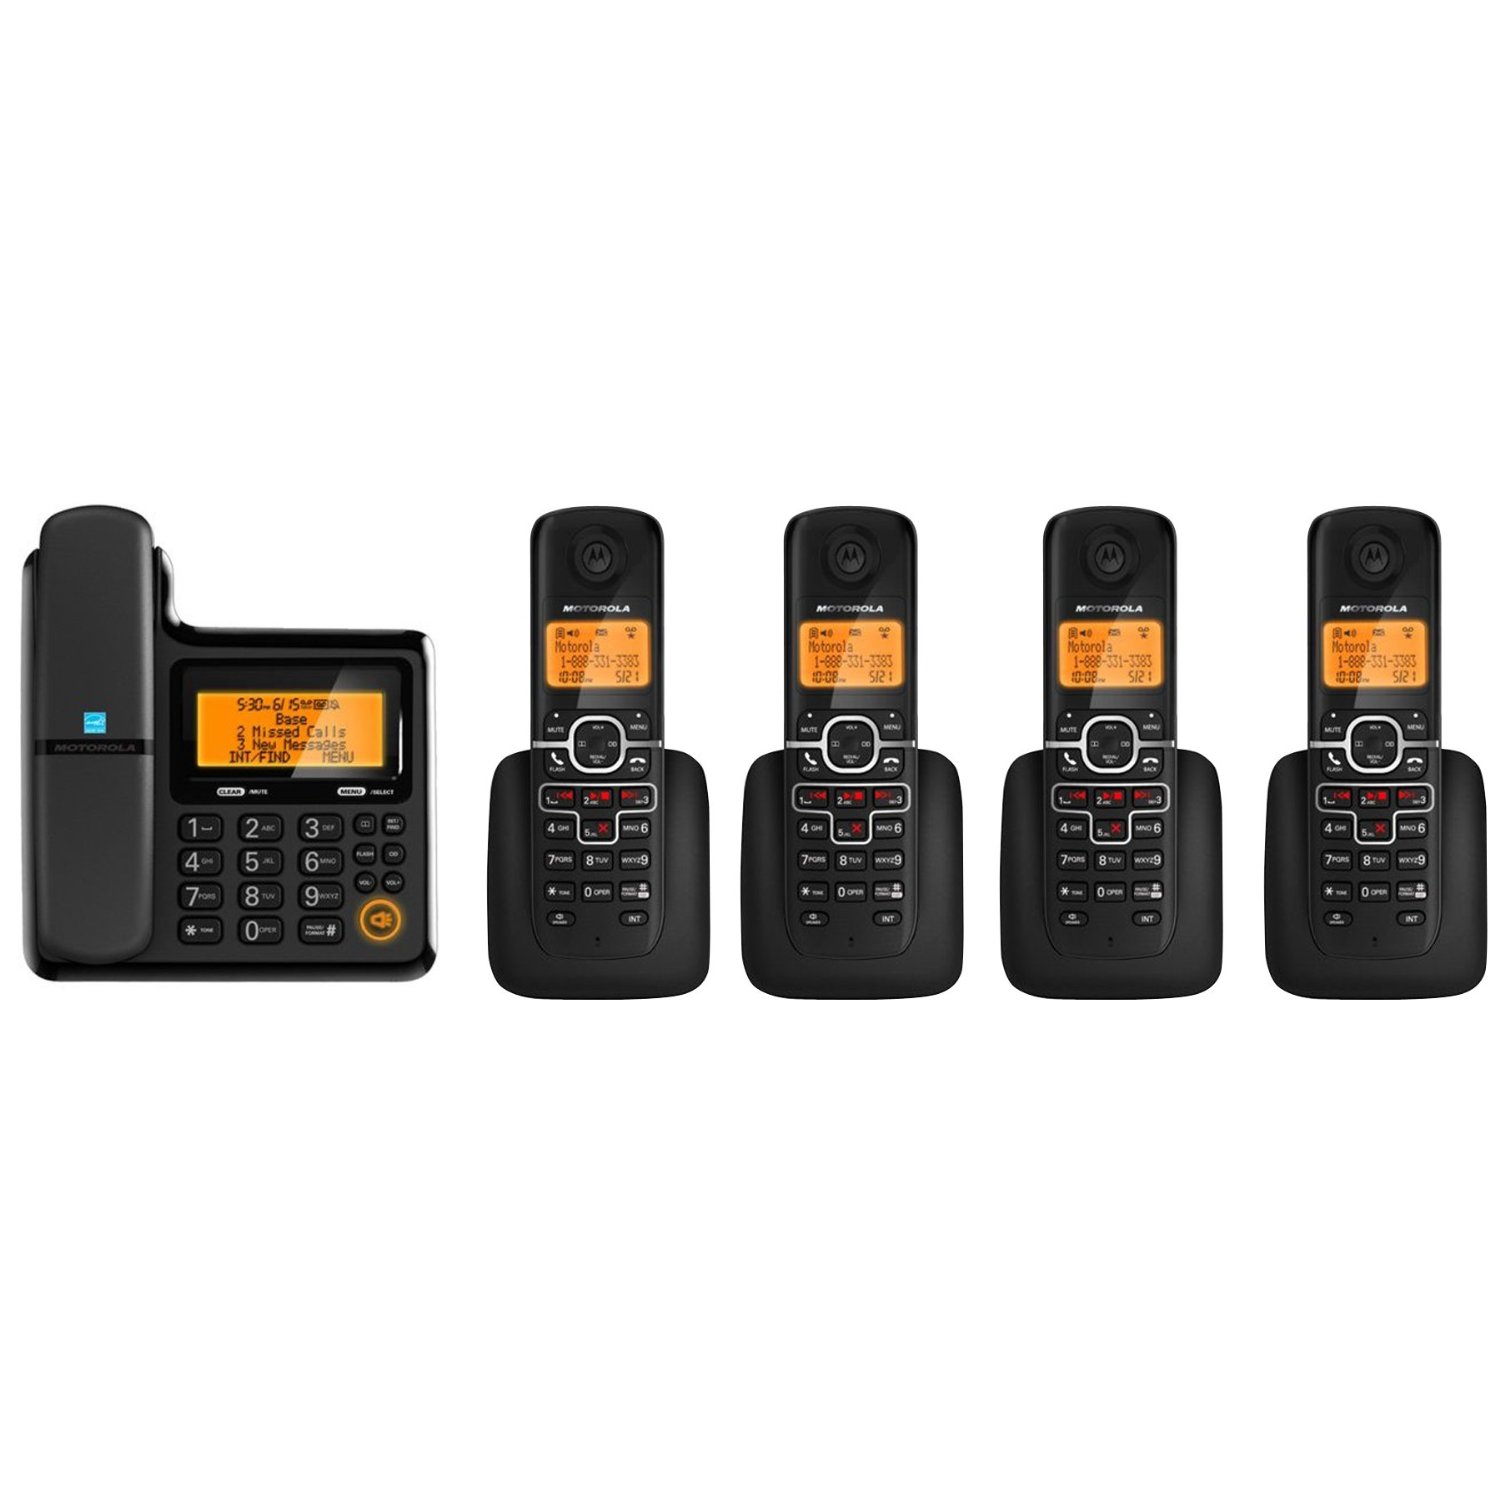 Motorola L705CM Corded/Cordless Phone System with 4 Cordless Handsets $69.99